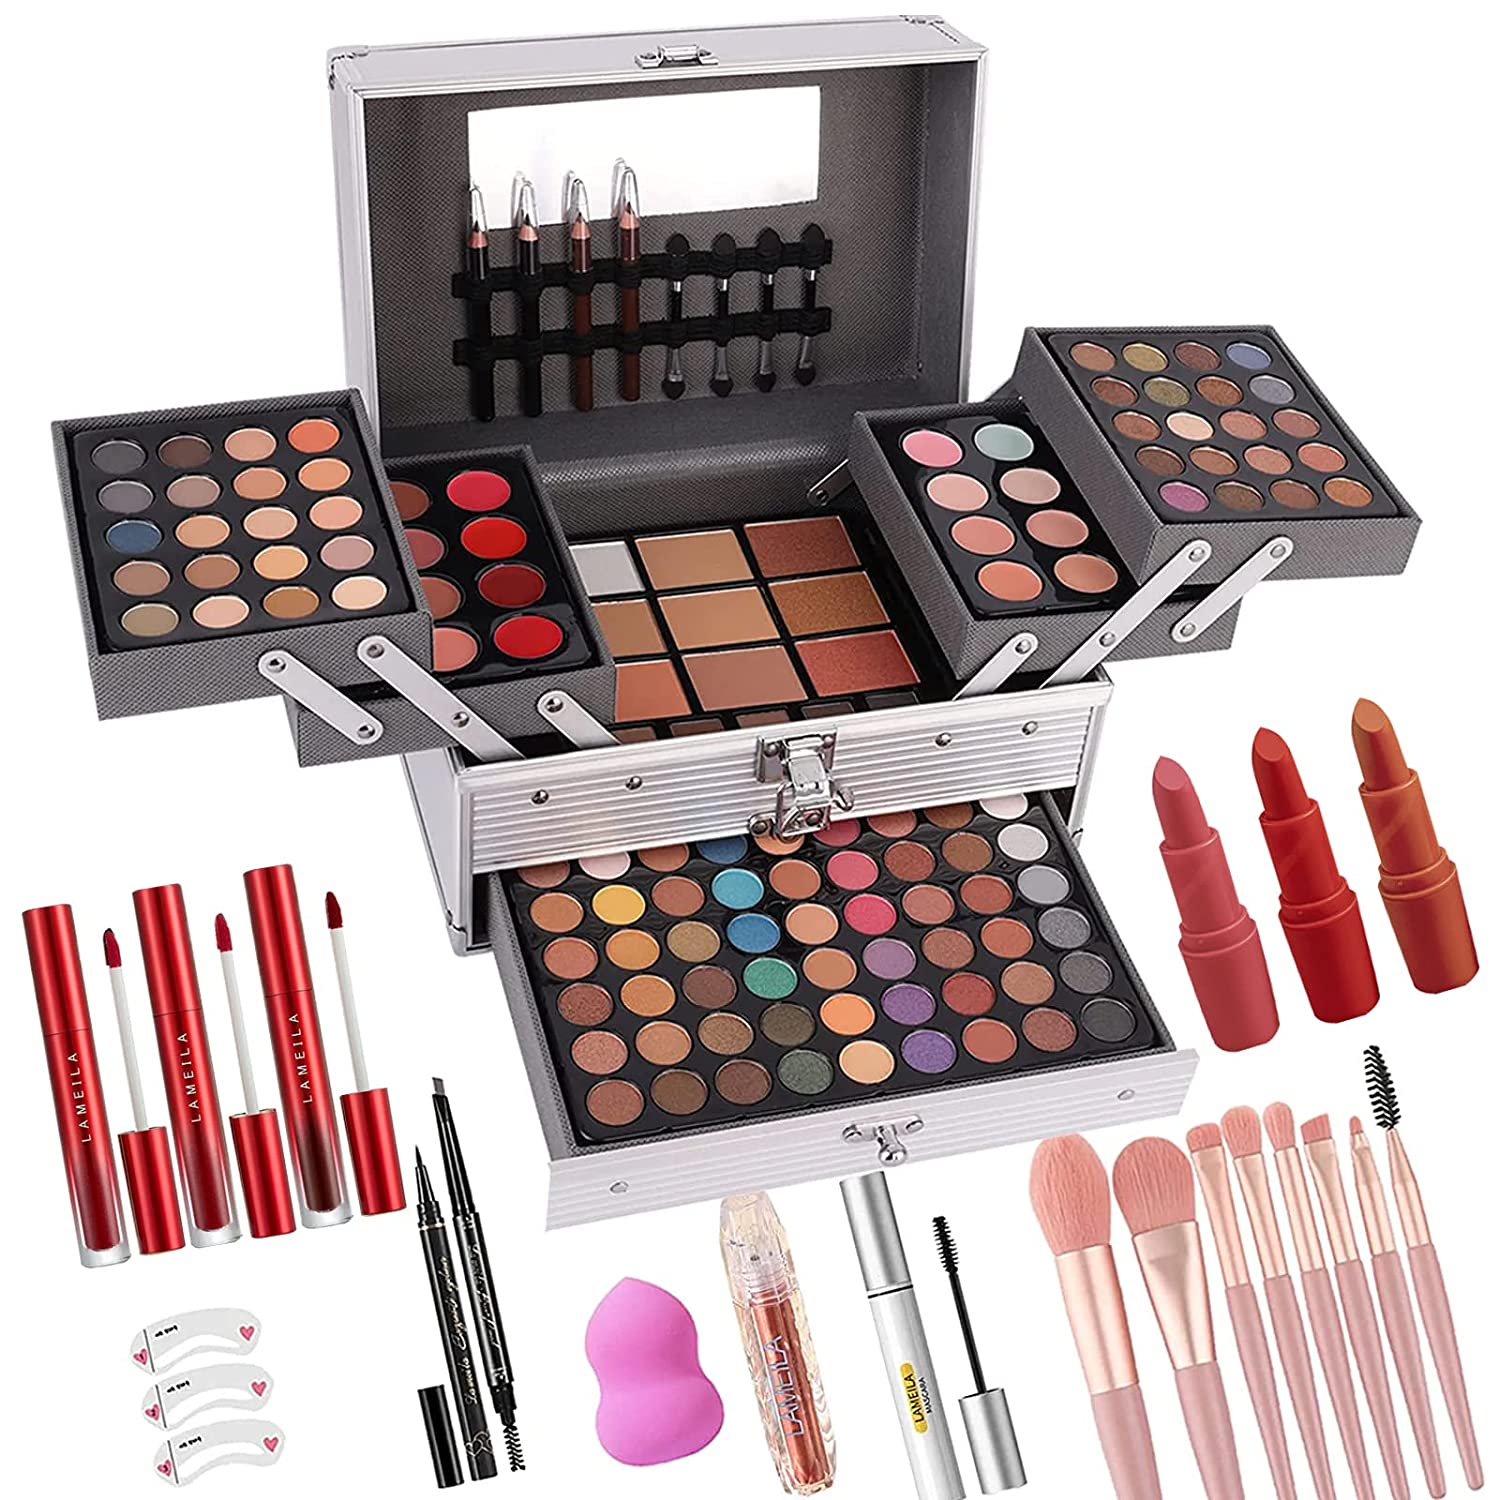 MISS ROSE 132 Color All-In-One Makeup Kit,Professional Makeup Kit for Women  Full Kit,Makeup Set for Women &Girls,Include